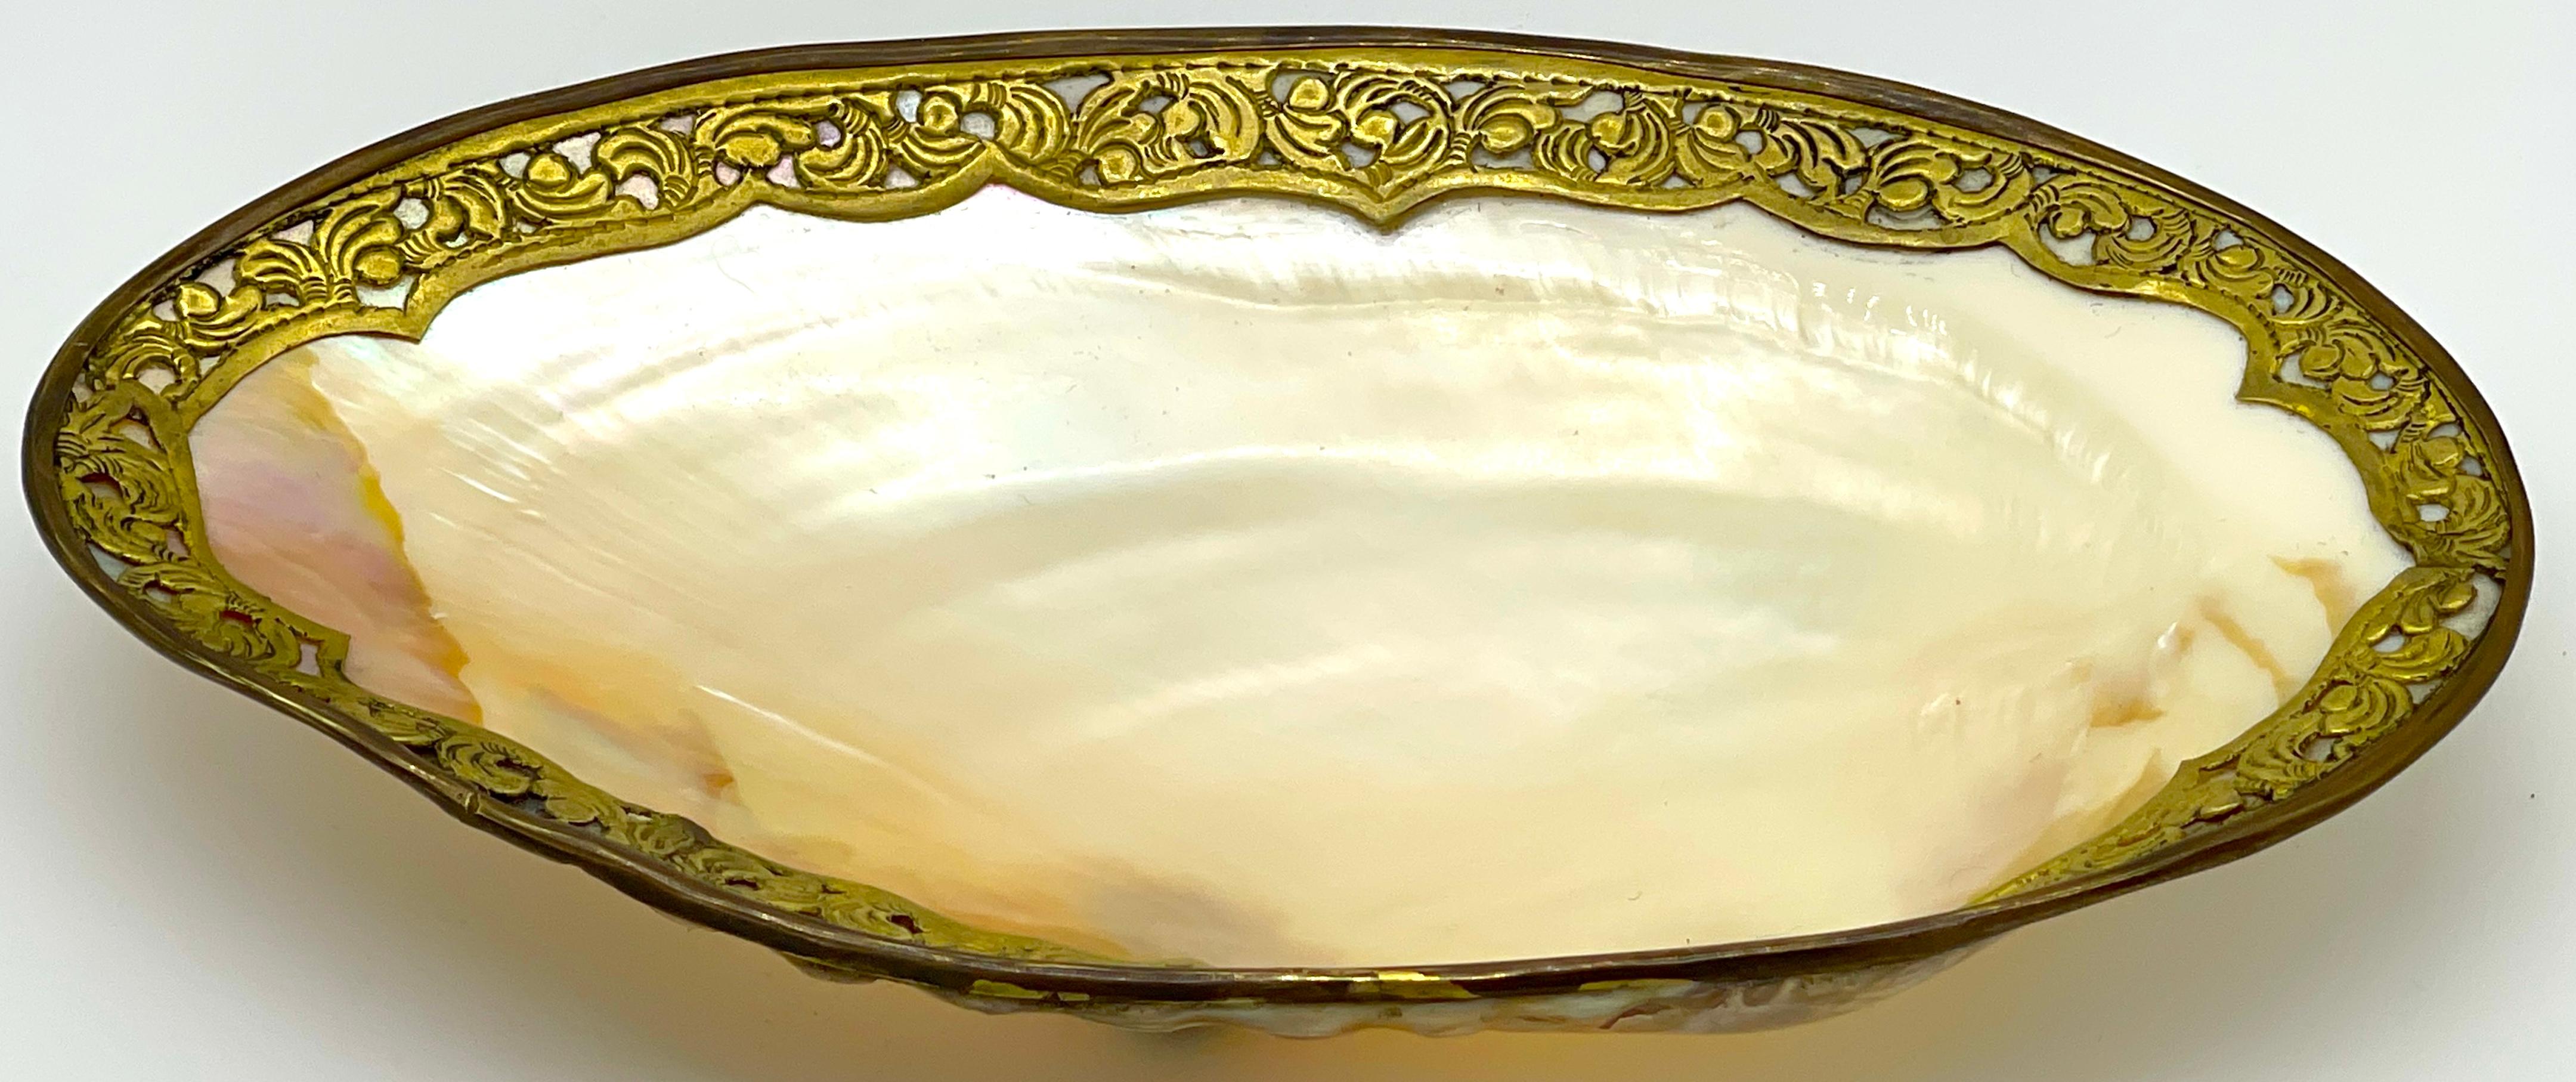 Napoleon III Ormolu Mounted Footed Shell Dish/ Vide-Poche For Sale 4